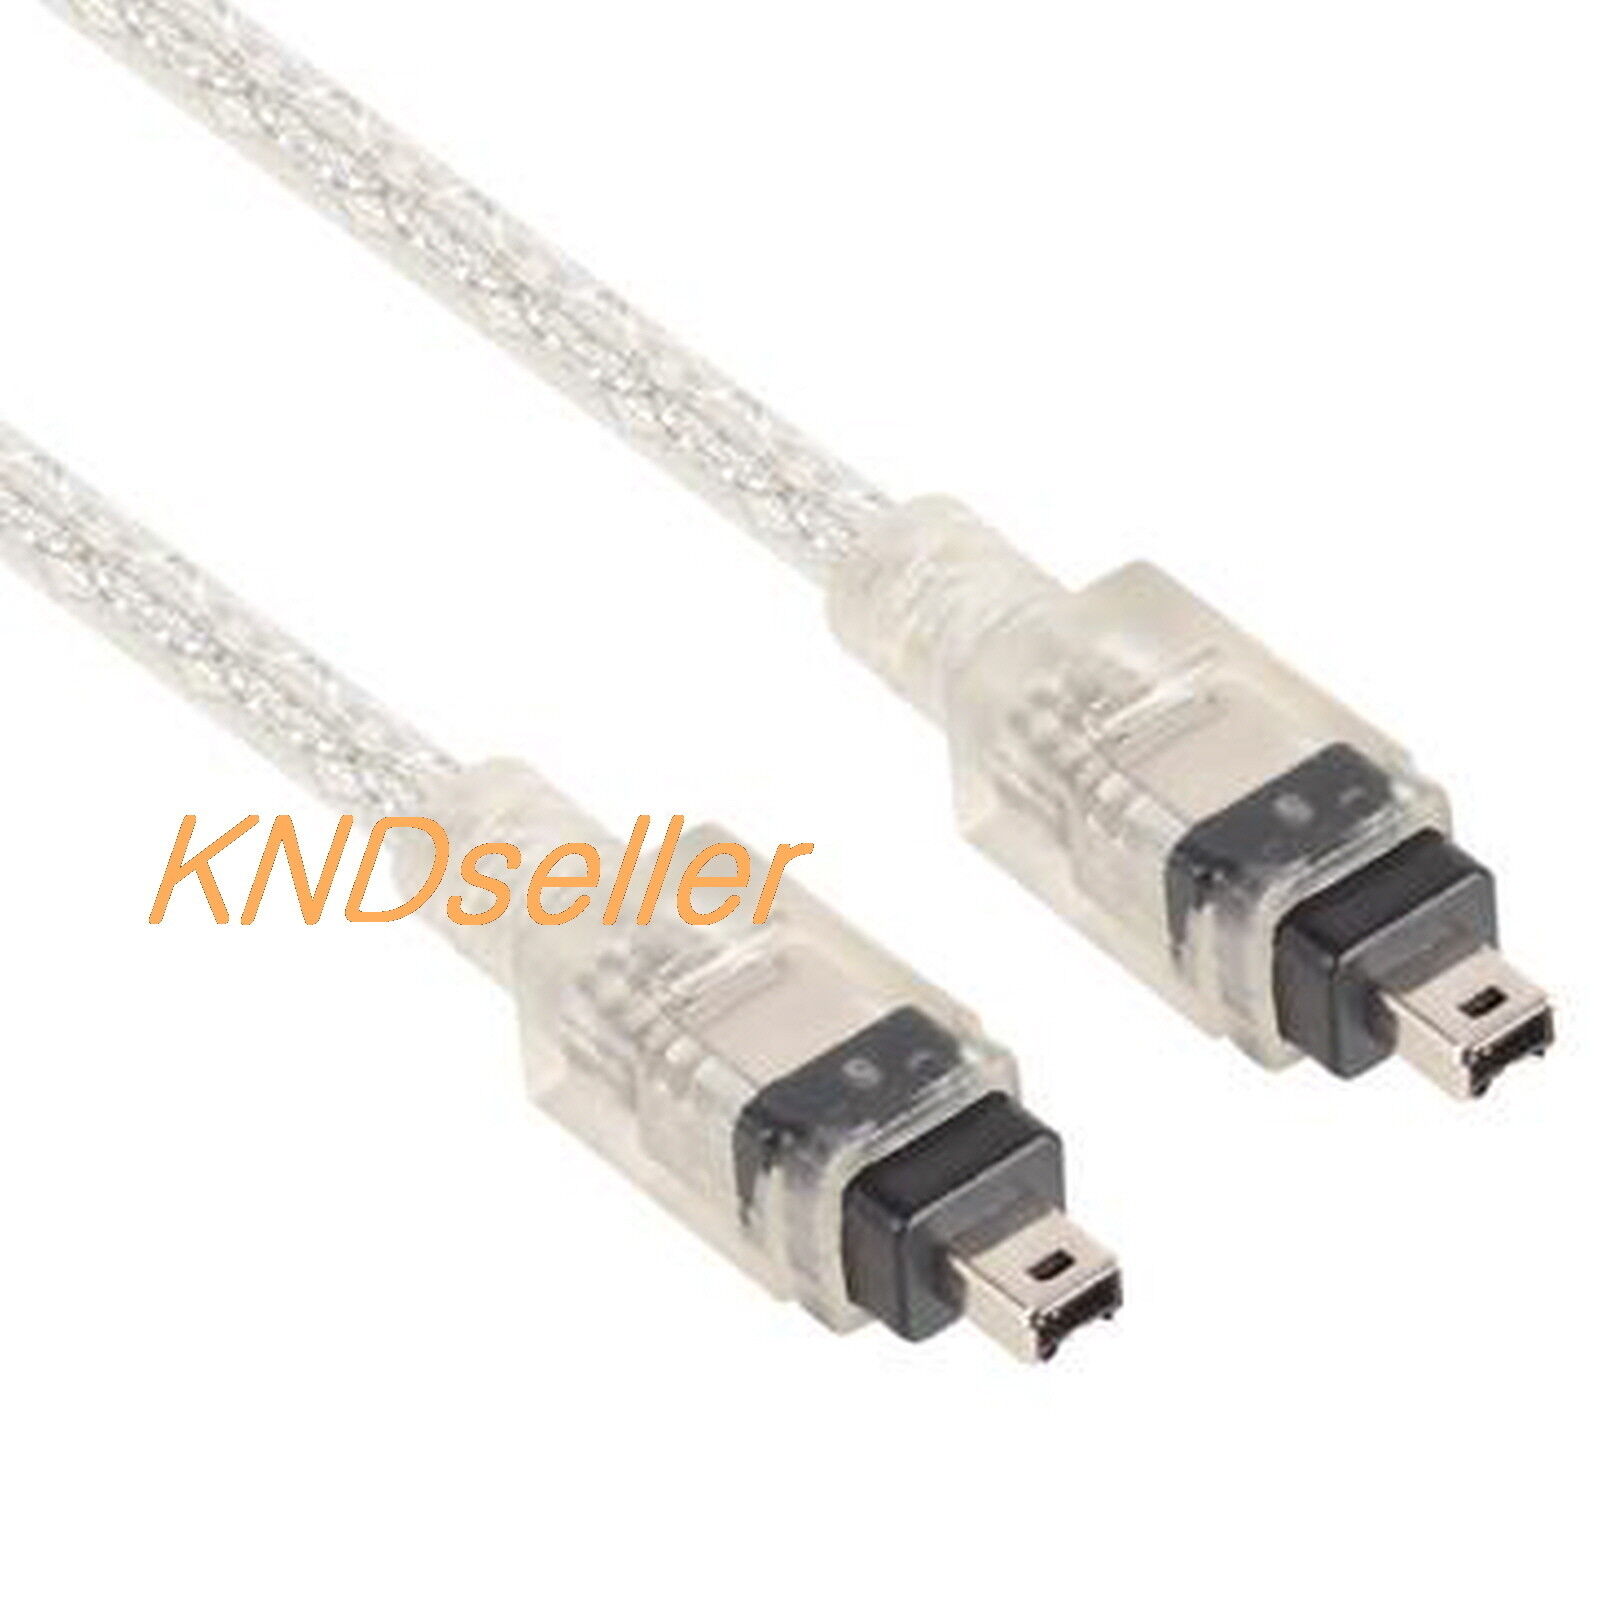 10M 30ft Firewire IEEE 1394 4P to 4P Cable 4-4 HDD Digital Camcorder PC MAC DV